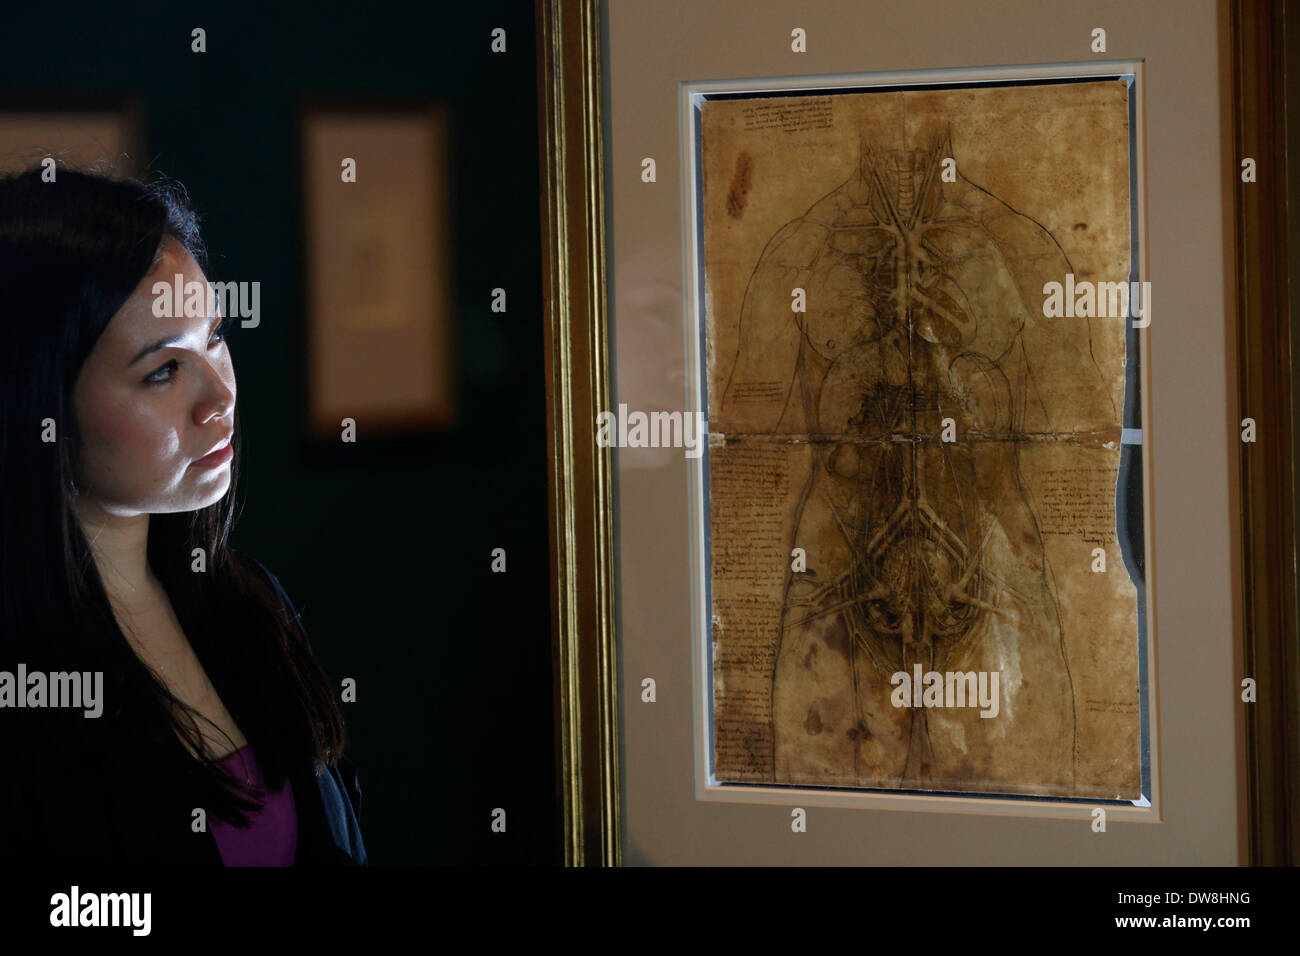 Employee Hanae Tsuji is reflected as she poses with artist Leonardo da Vinci's drawing 'The cardiovascular system and principal organs of a woman, c.1509-10' at the Queen's Gallery at Buckingham Palace in London April 30, 2012. The exhibition 'Leonardo da Vinci : Anatomist' opens Friday and runs to October 7, 2012. Stock Photo